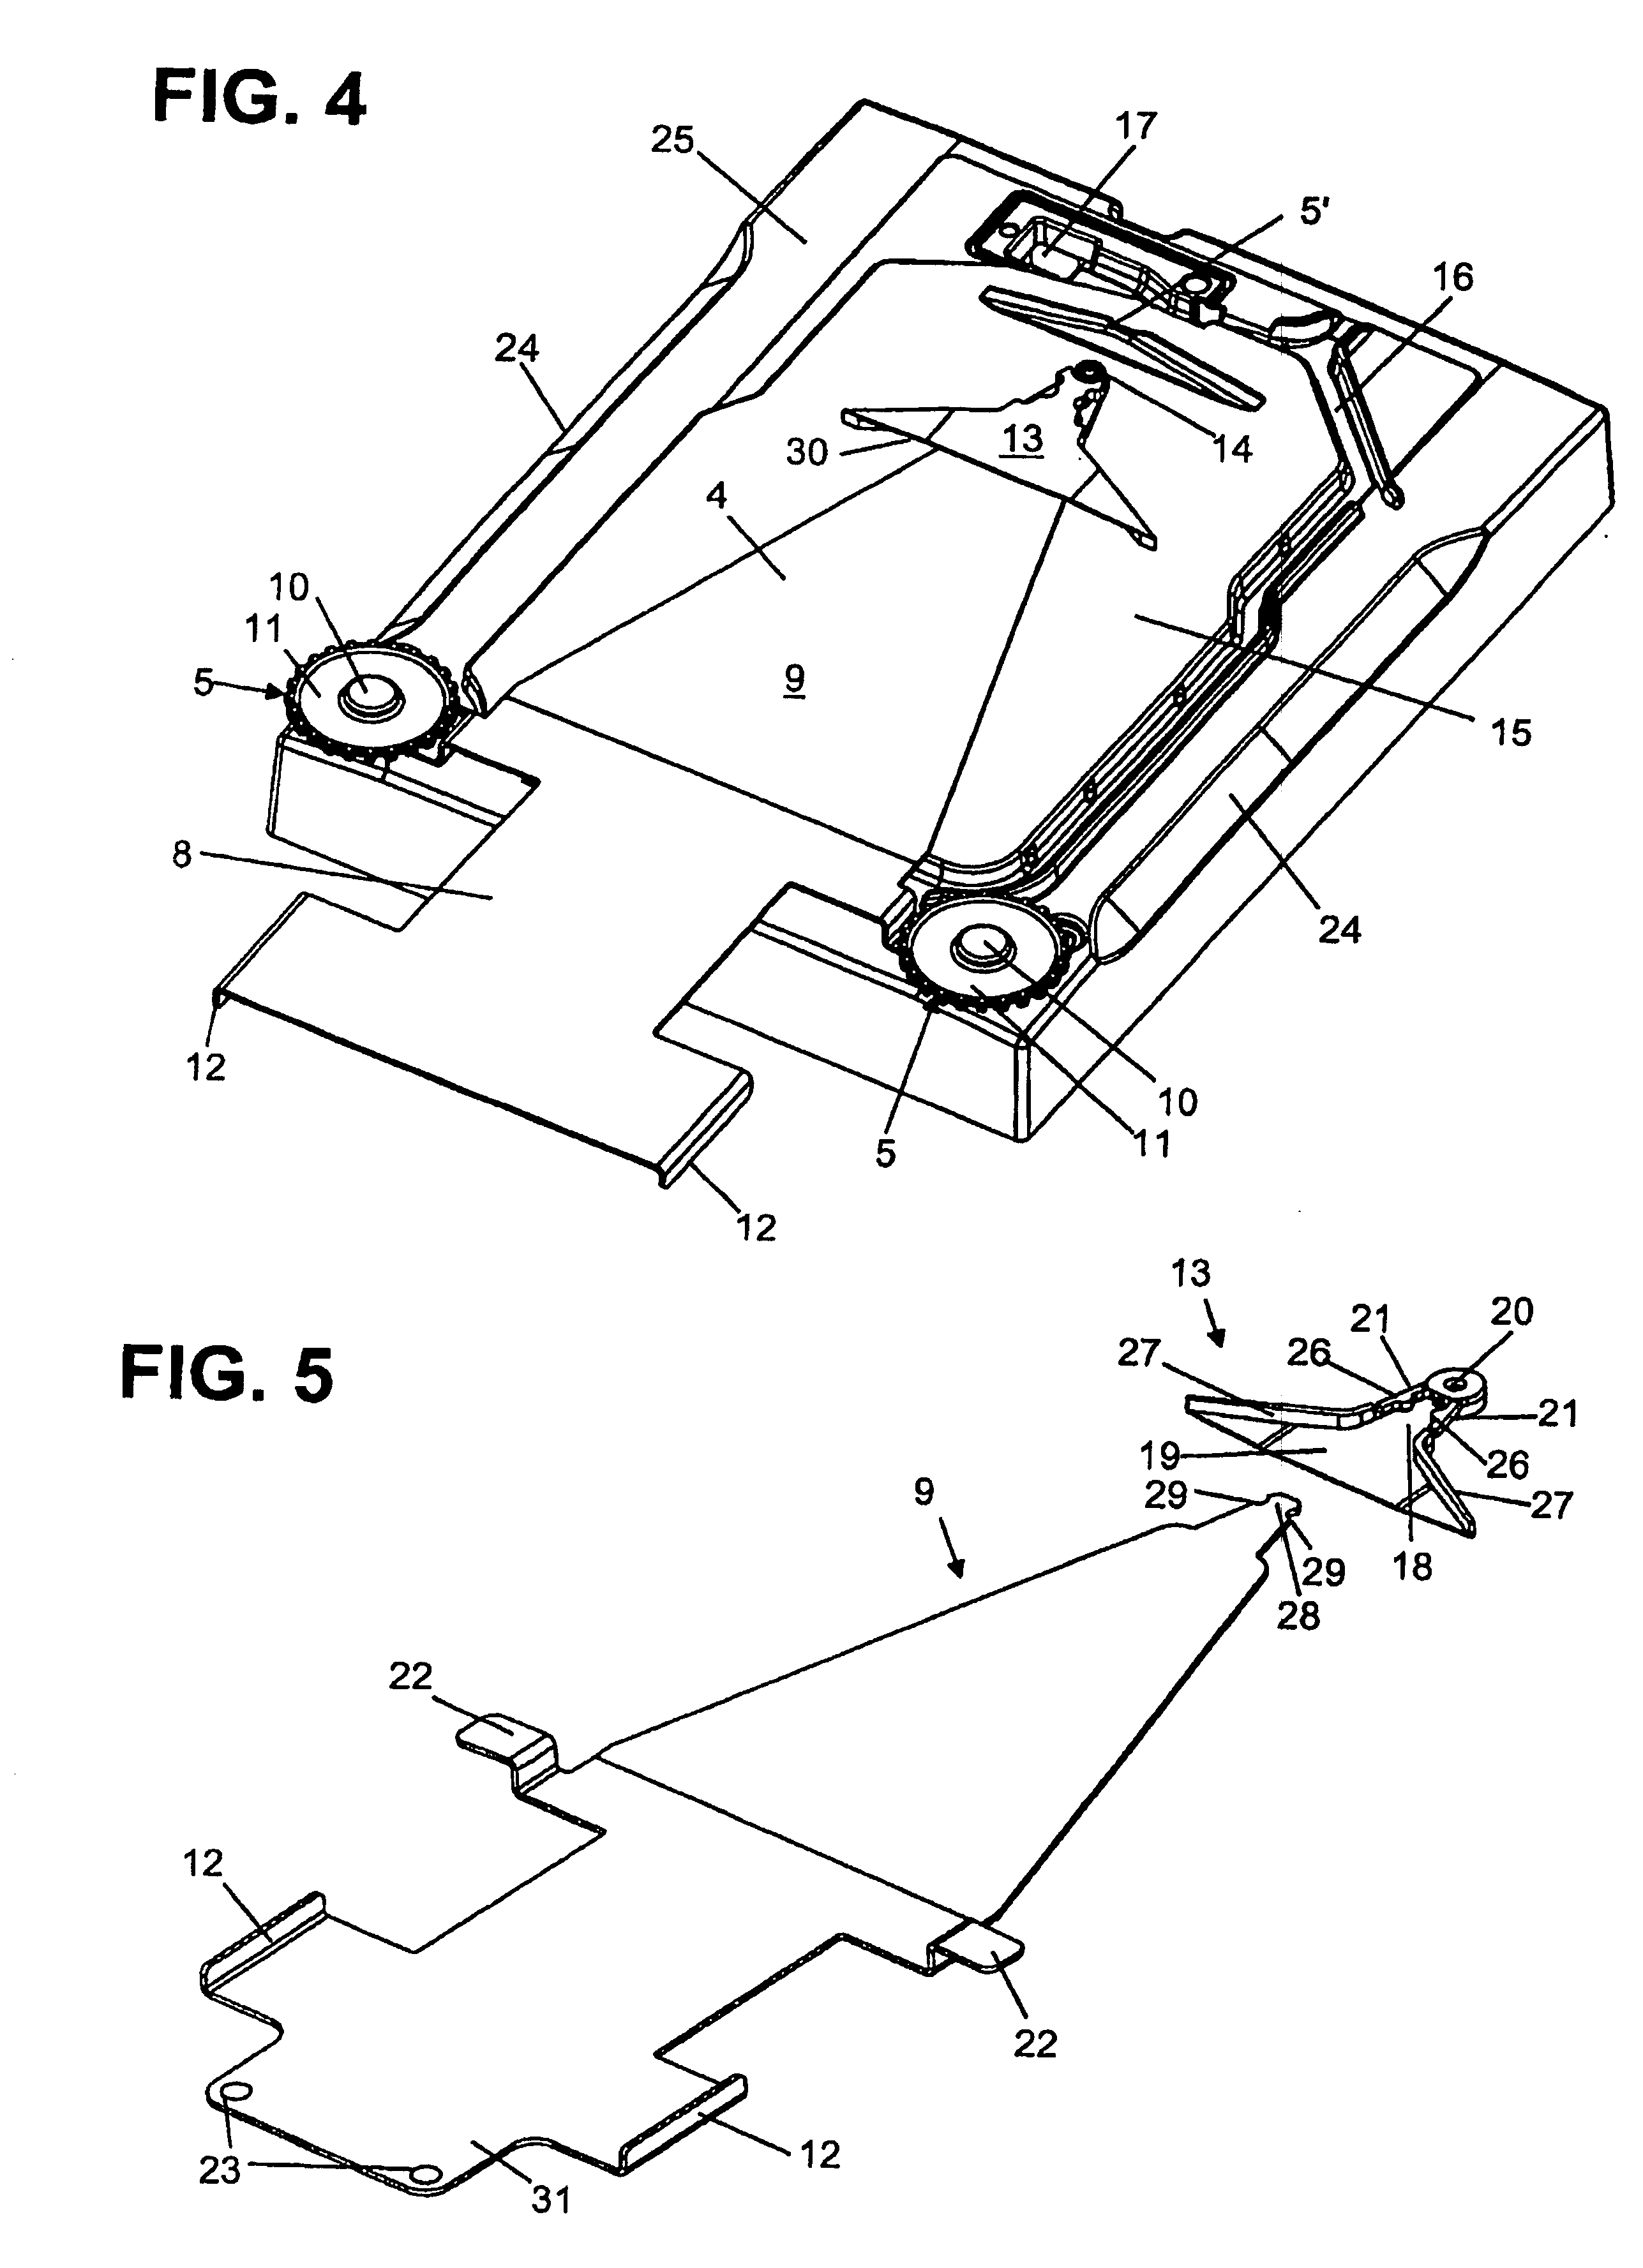 Scale having a display and operating unit